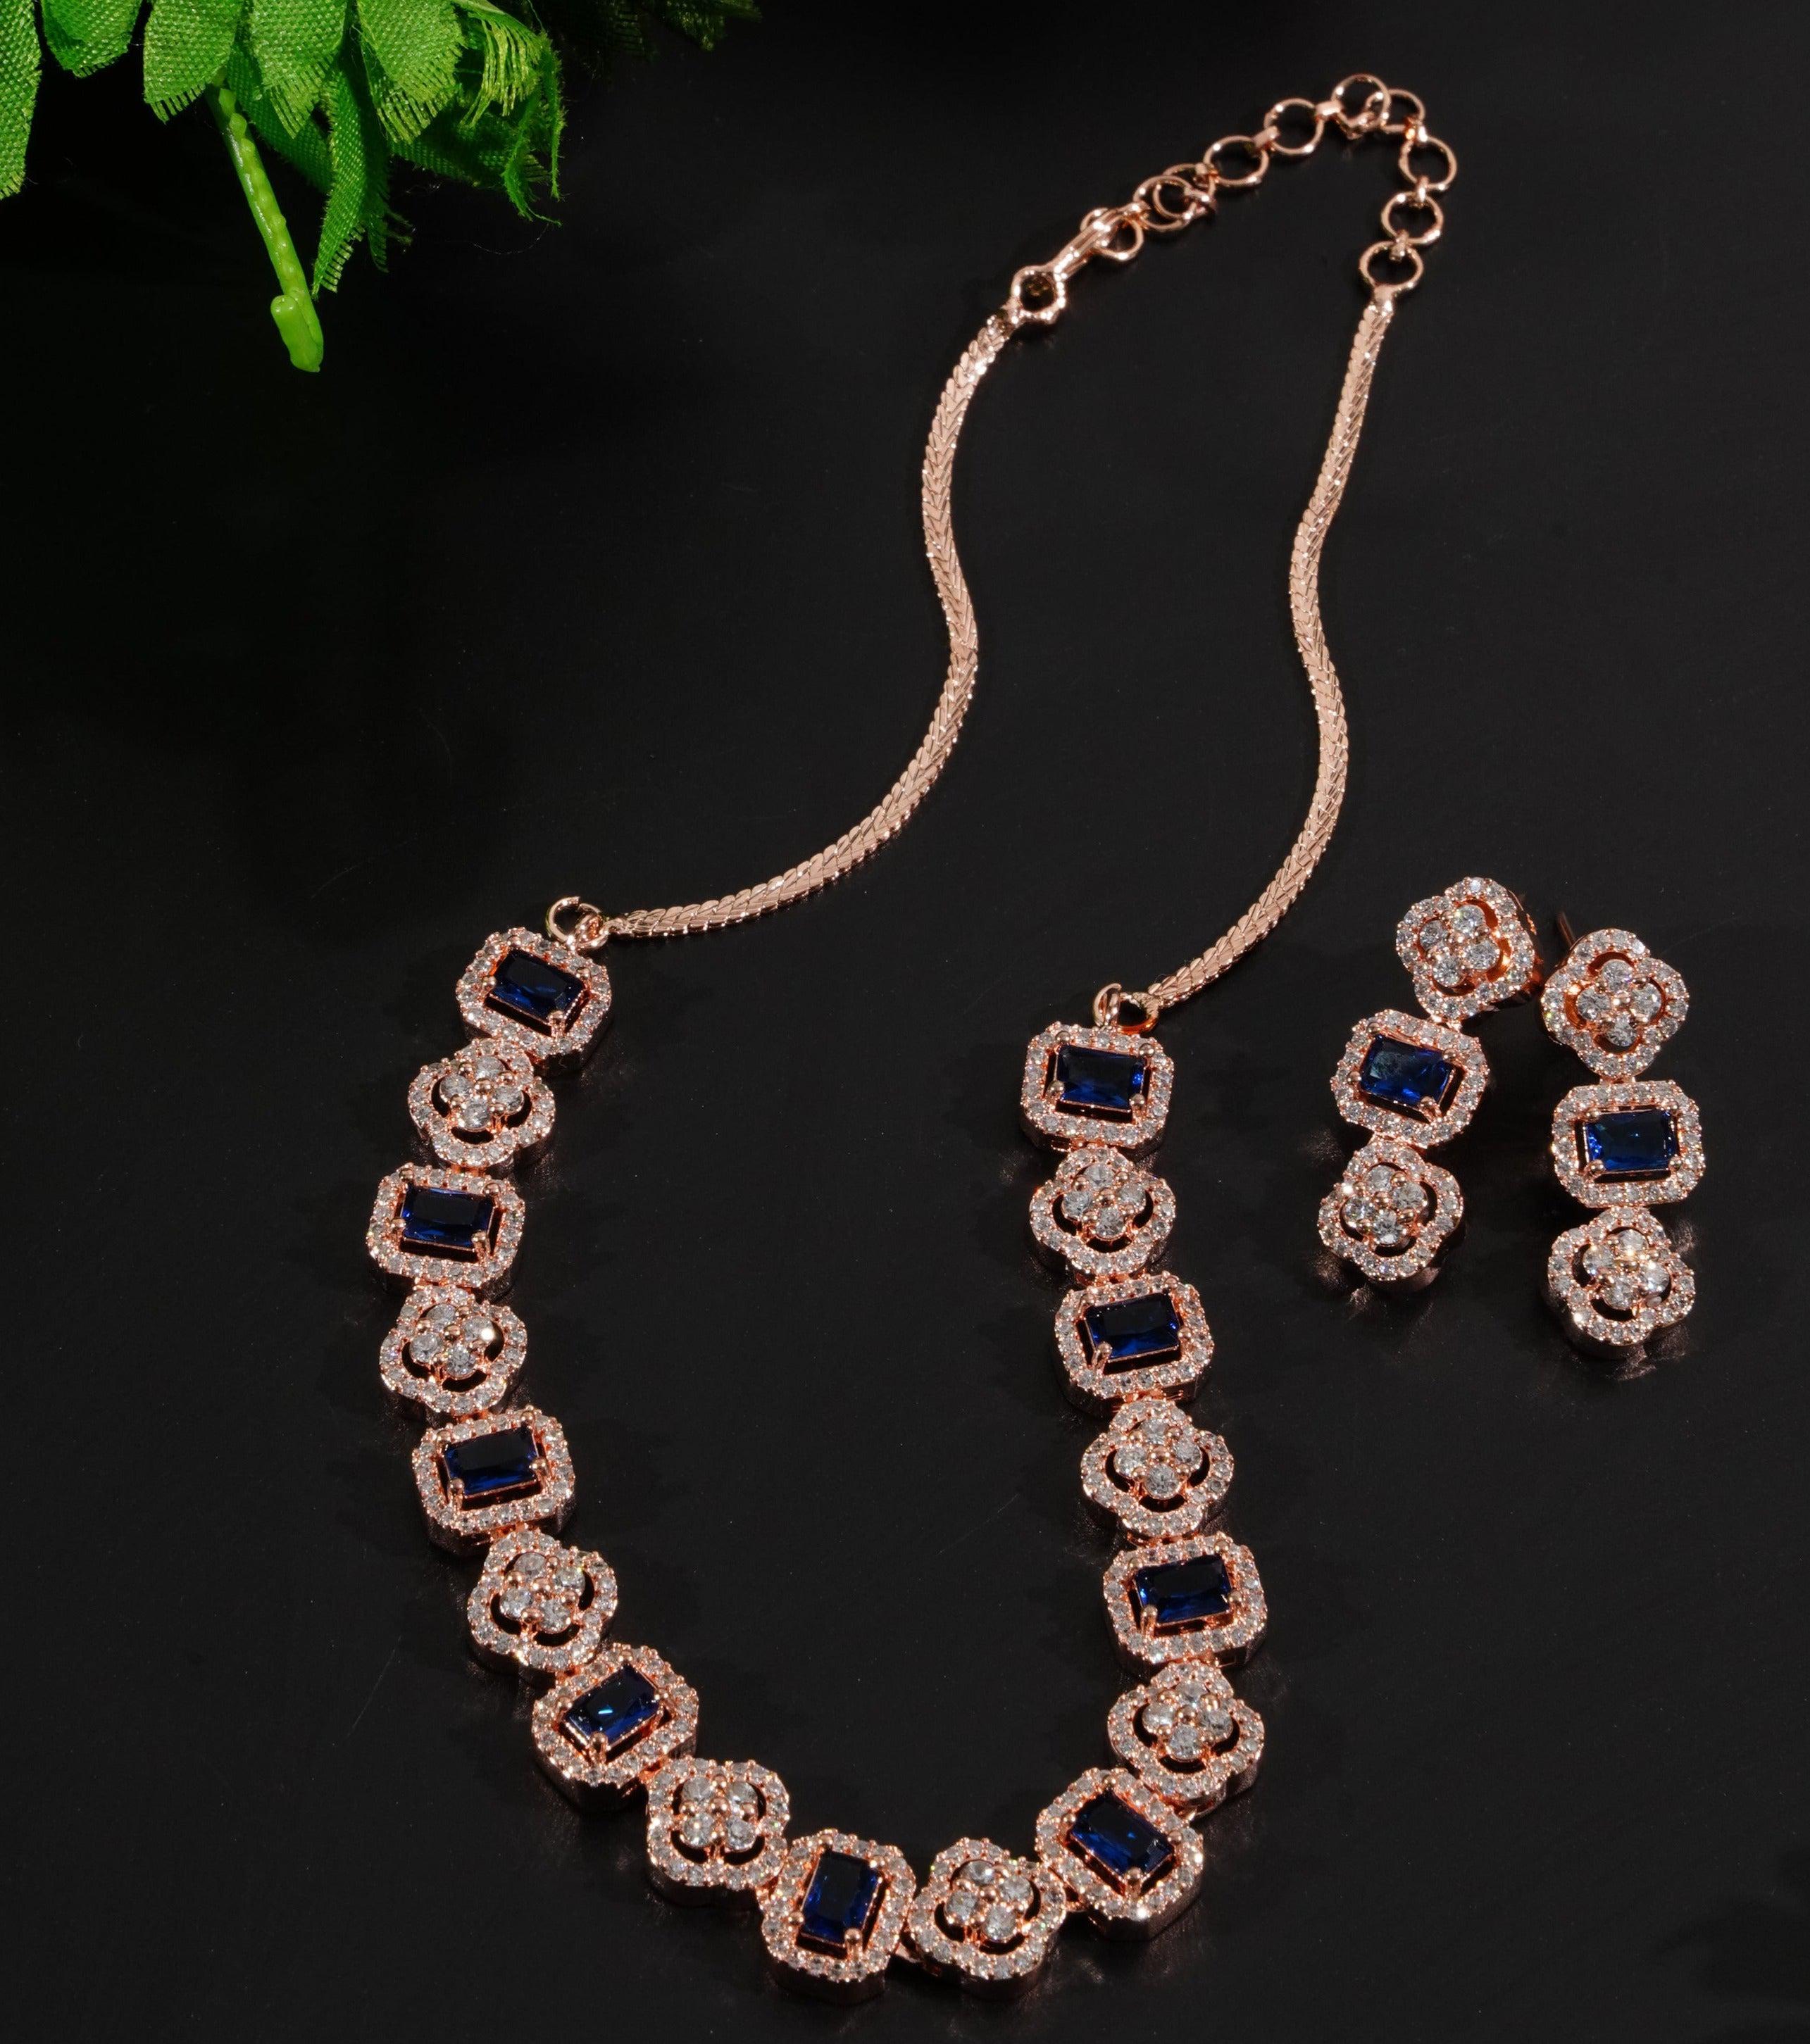 Premium Sayara Collection White Gold Plated Necklace set with Top quality Blue CZ Stone 8815N